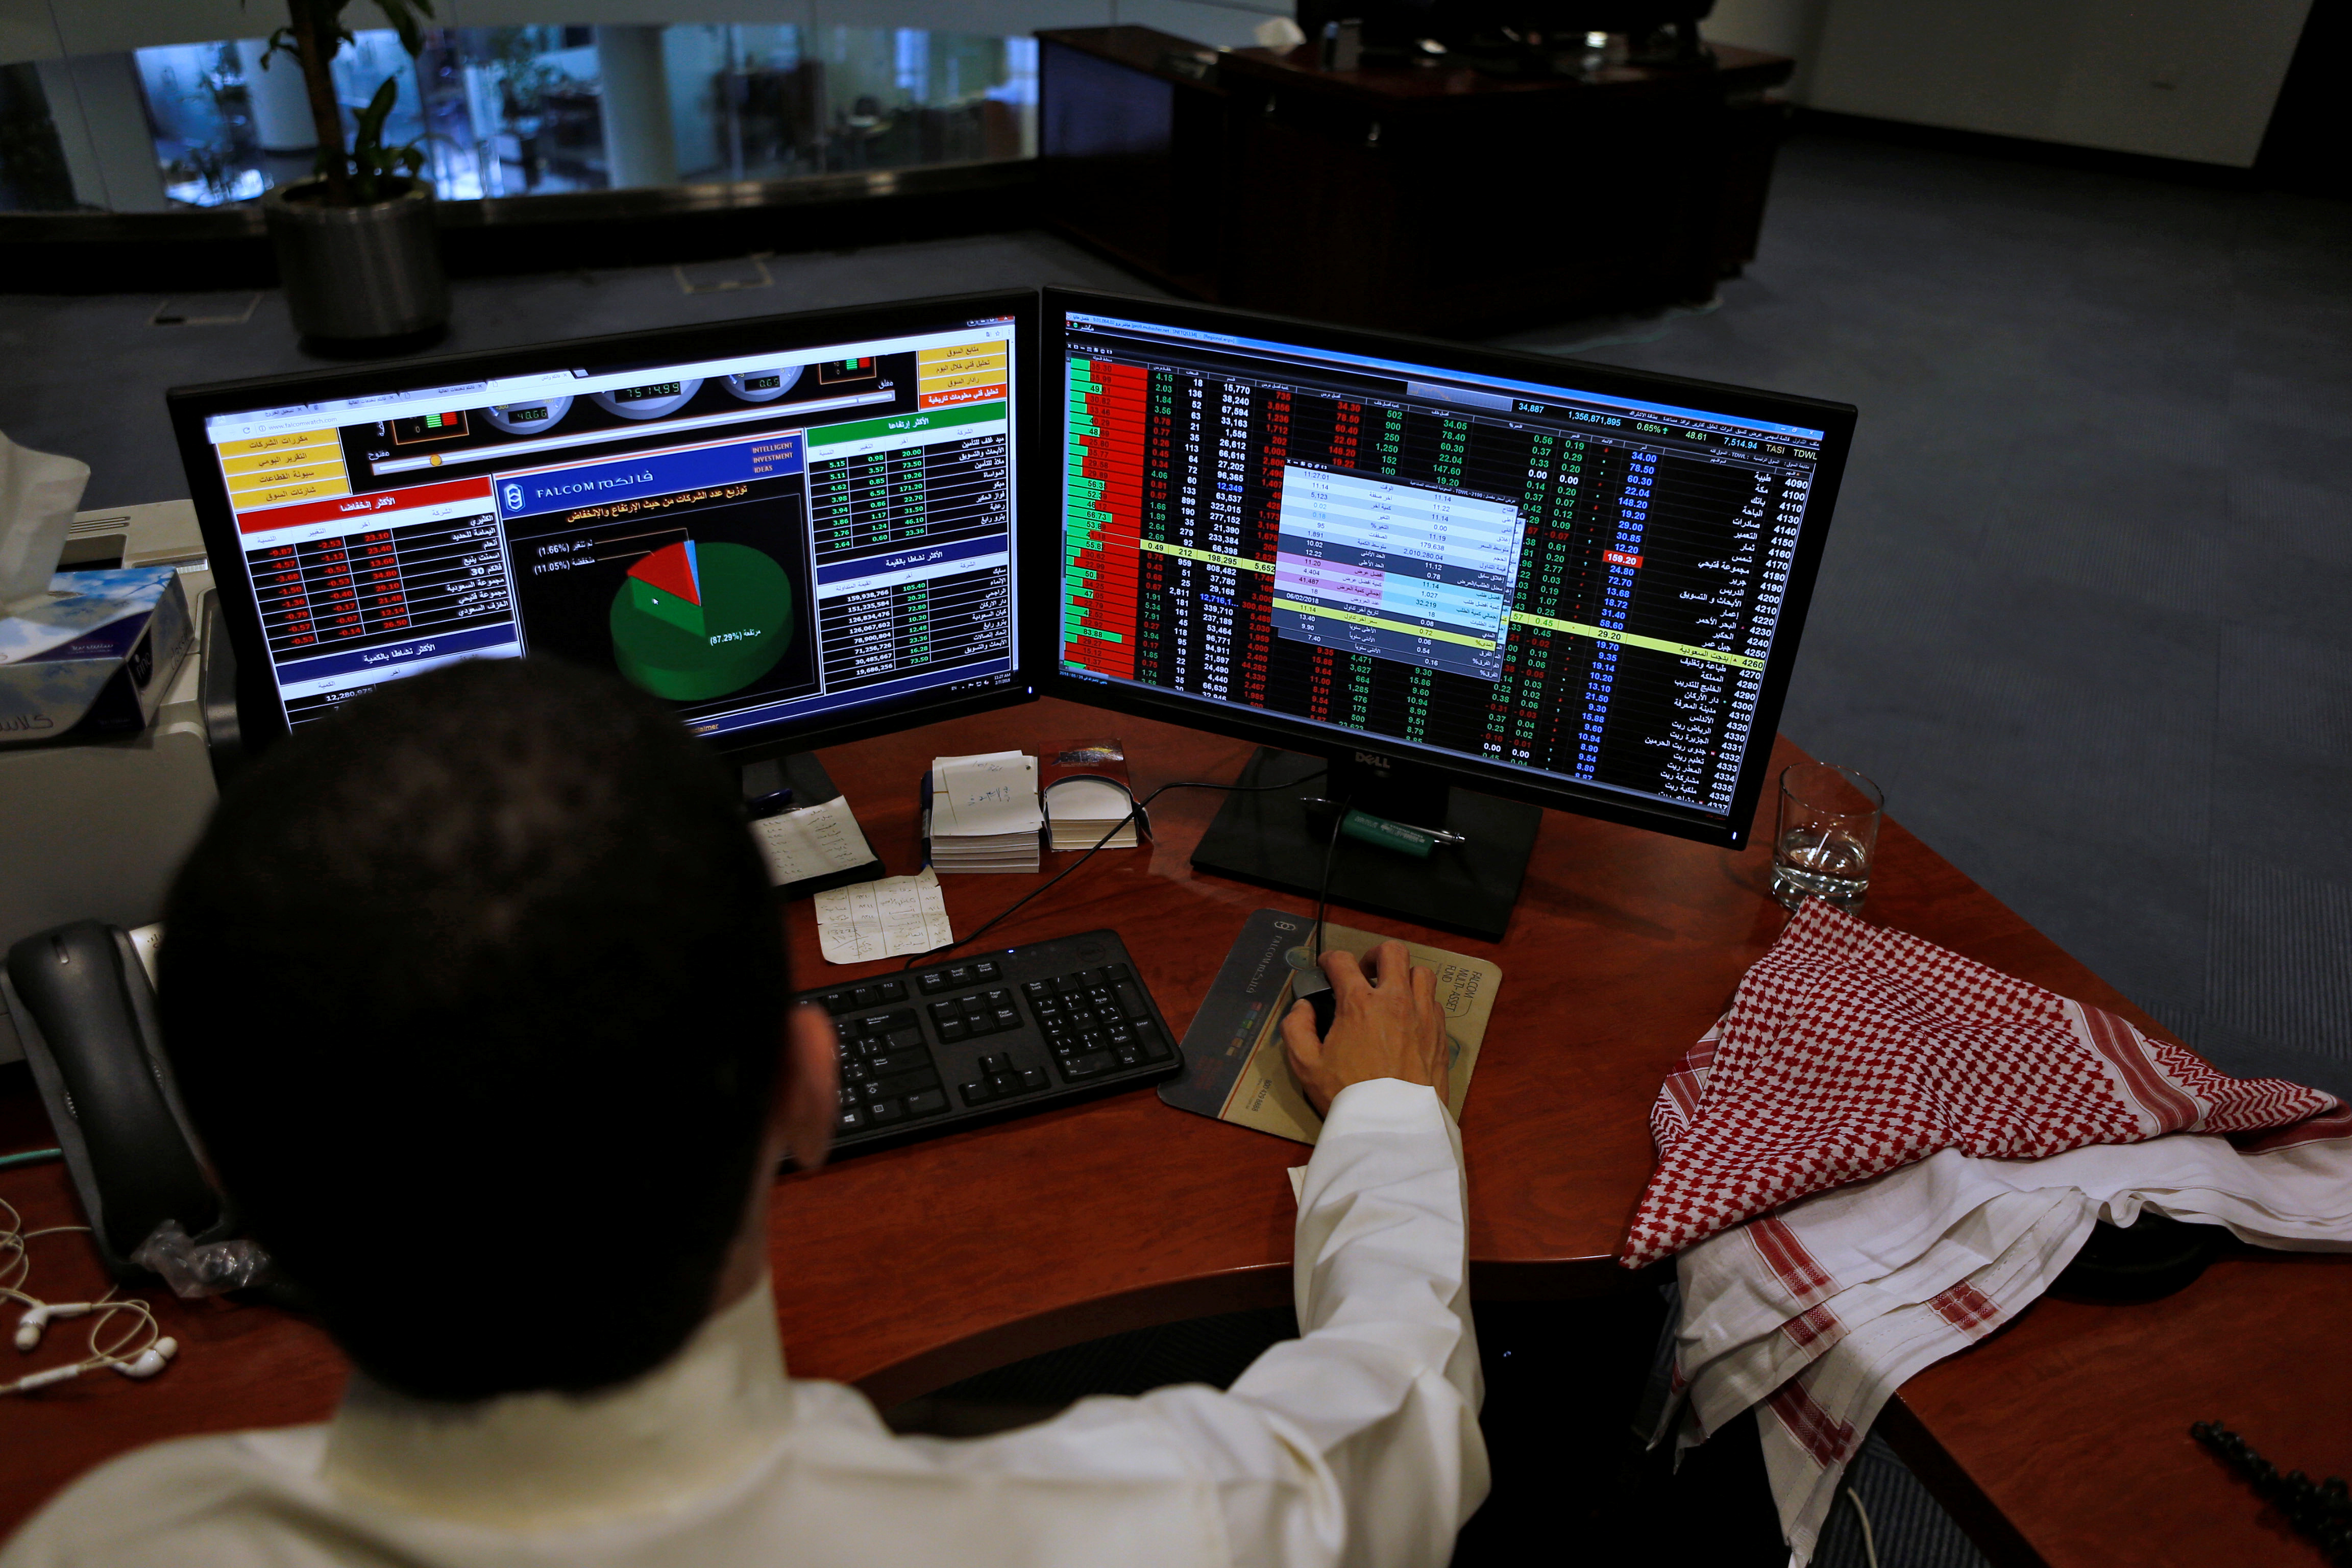 A Saudi trader observes the stock market on monitors at Falcom stock exchange agency in Riyadh